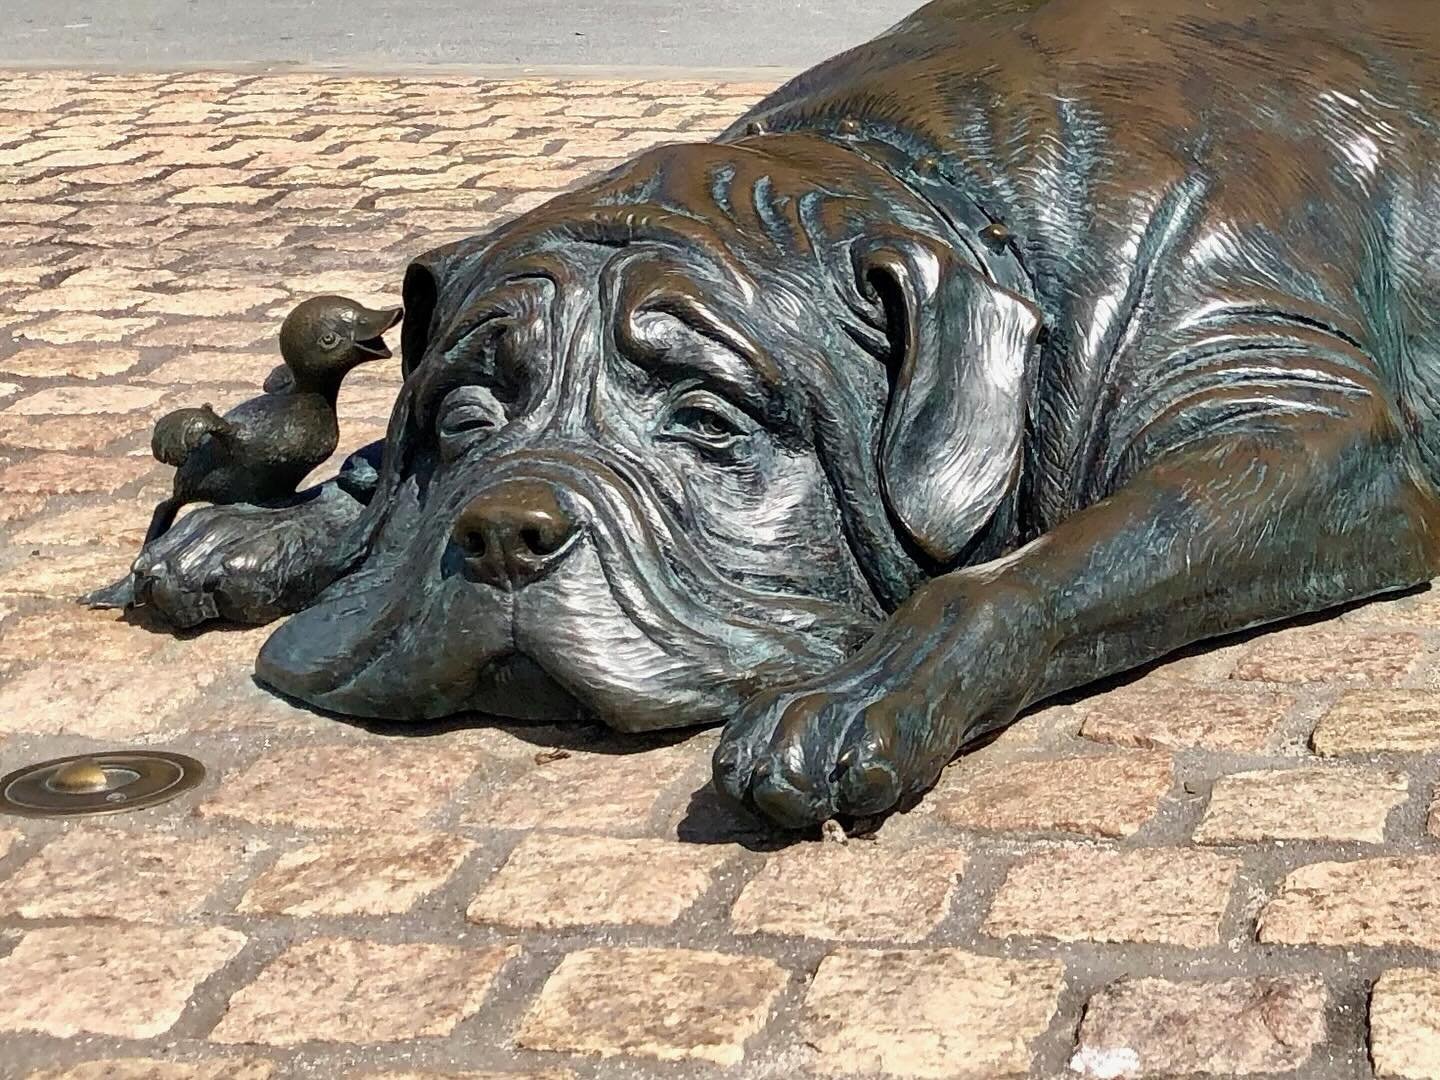 AN ALBUM FEATURING DOGS | A significant birthday for a special canine we know, and memories of another loved dog we miss, inspired this album for our paid subscribers of dog statues we&rsquo;ve visited throughout Aotearoa New Zealand.  Read more on S